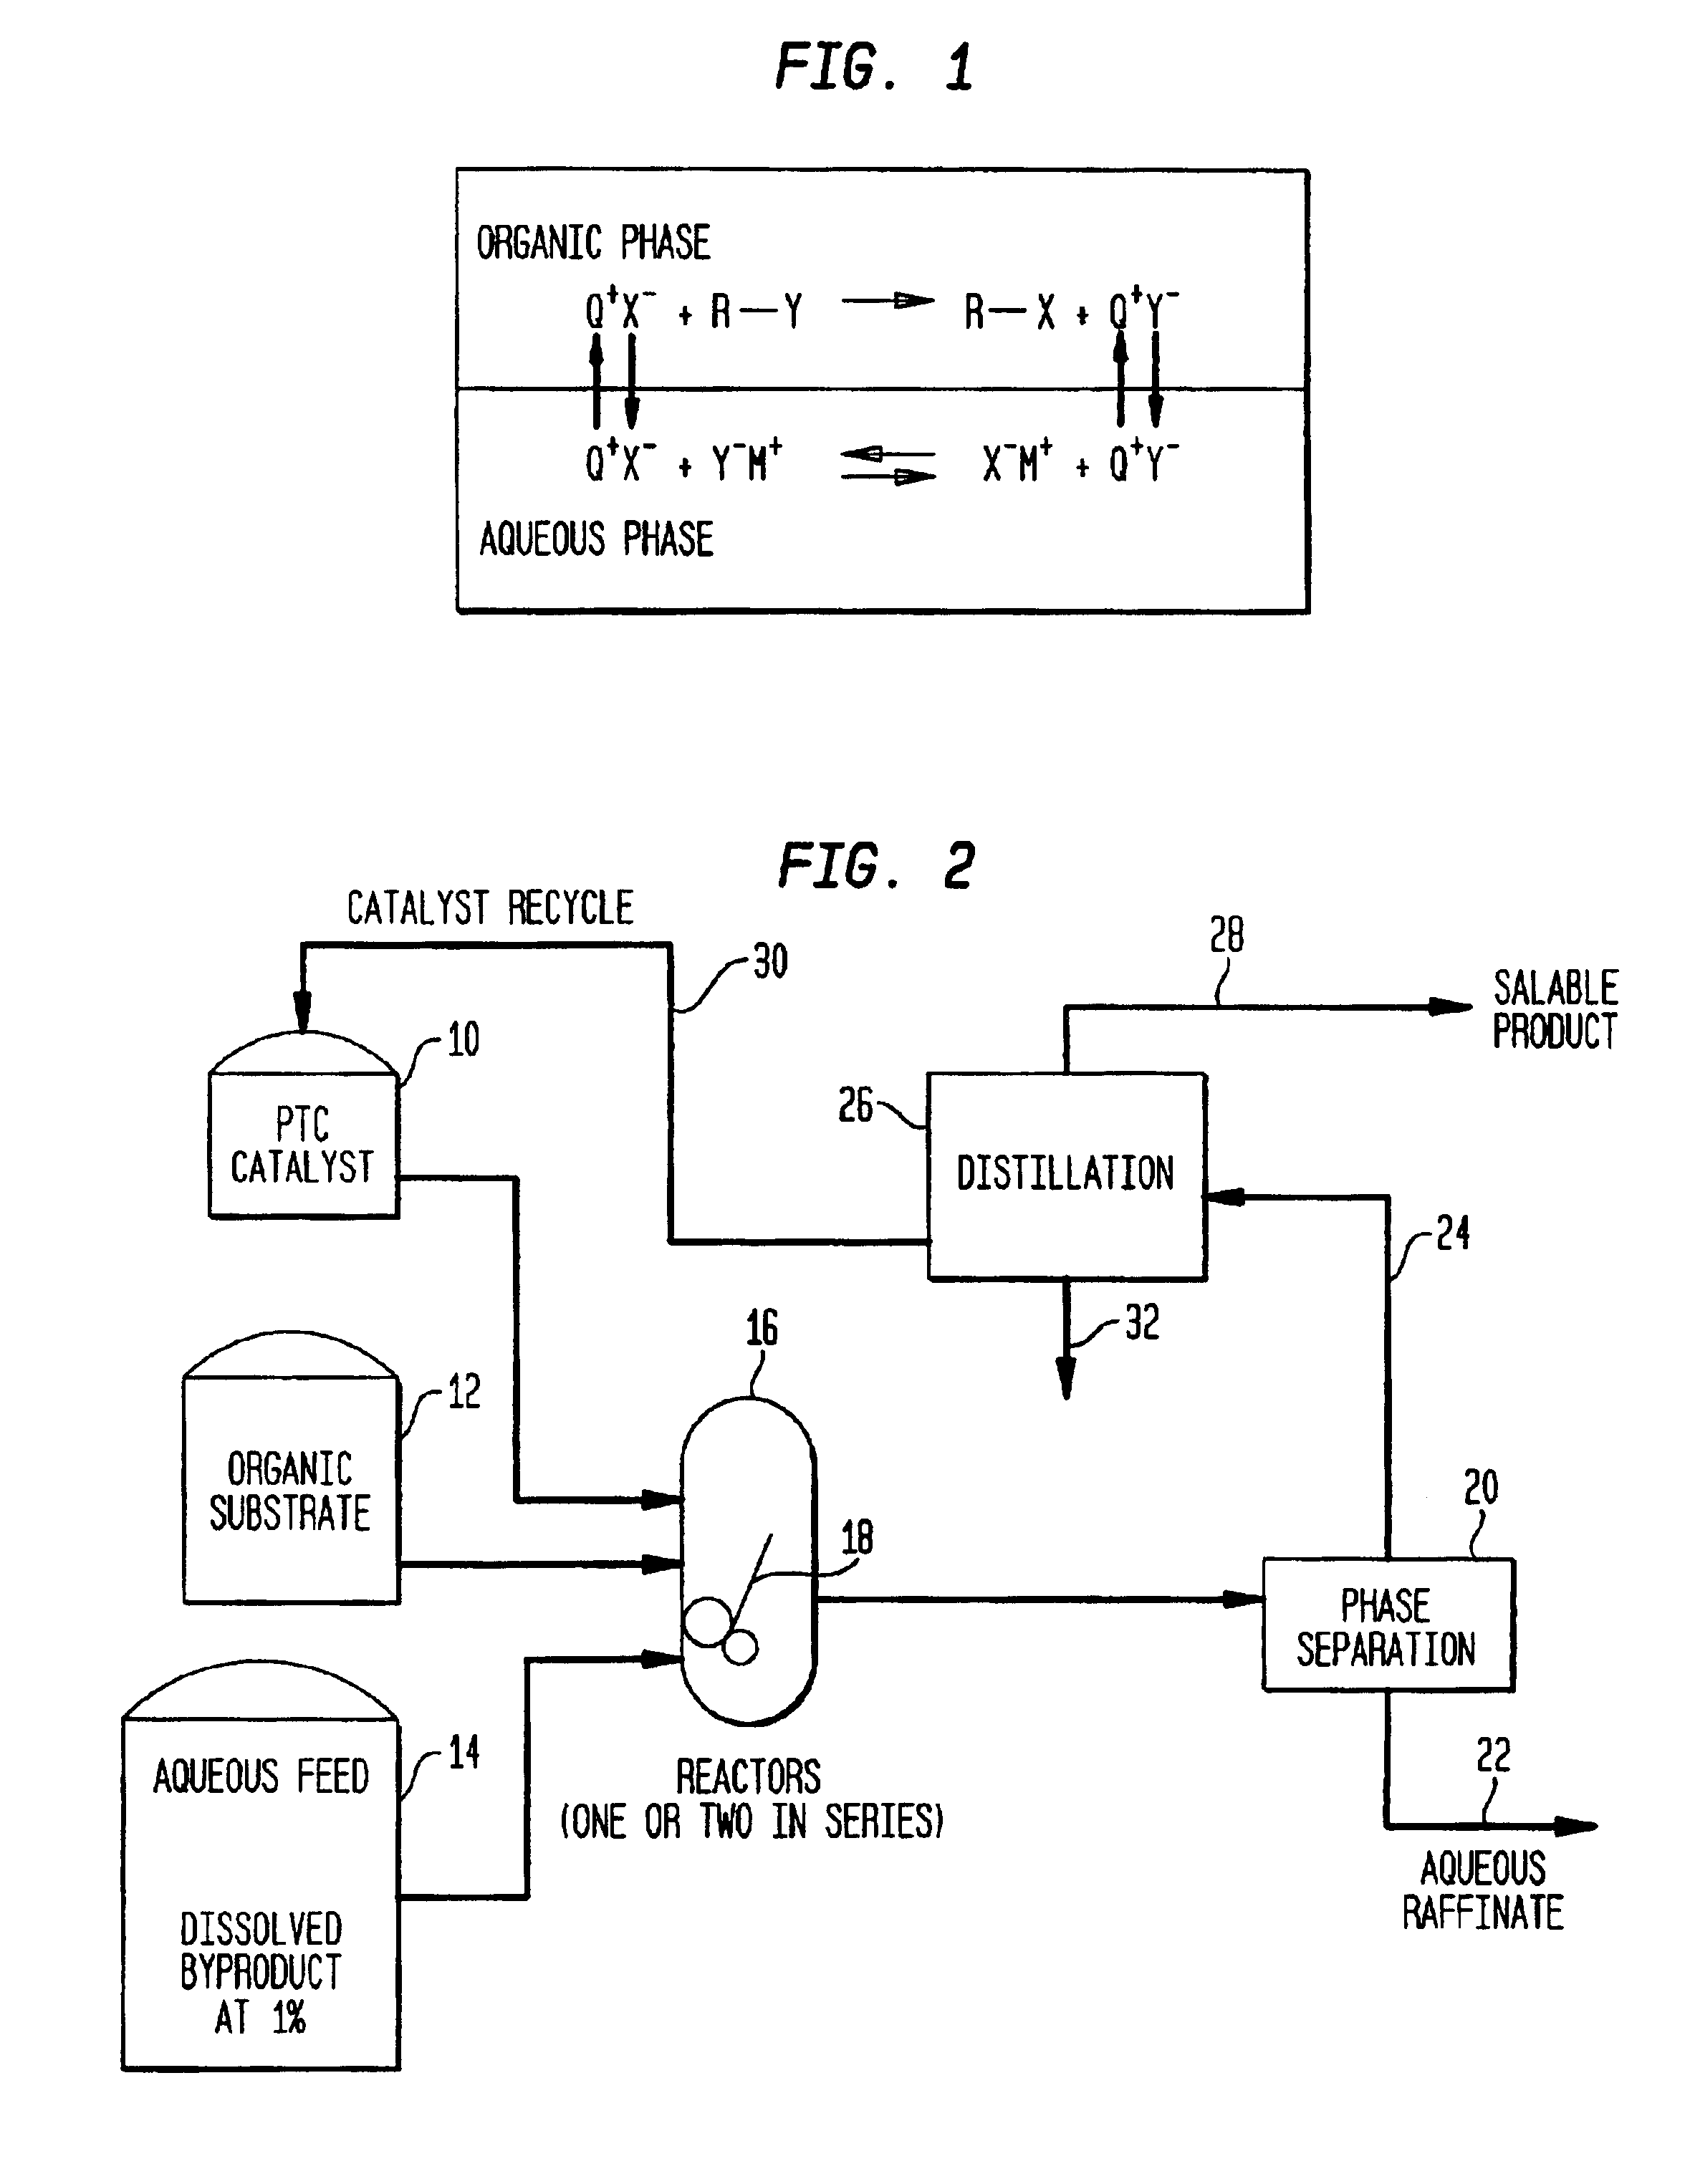 Process for making organic products and improving the quality of non-product streams using phase transfer catalysis